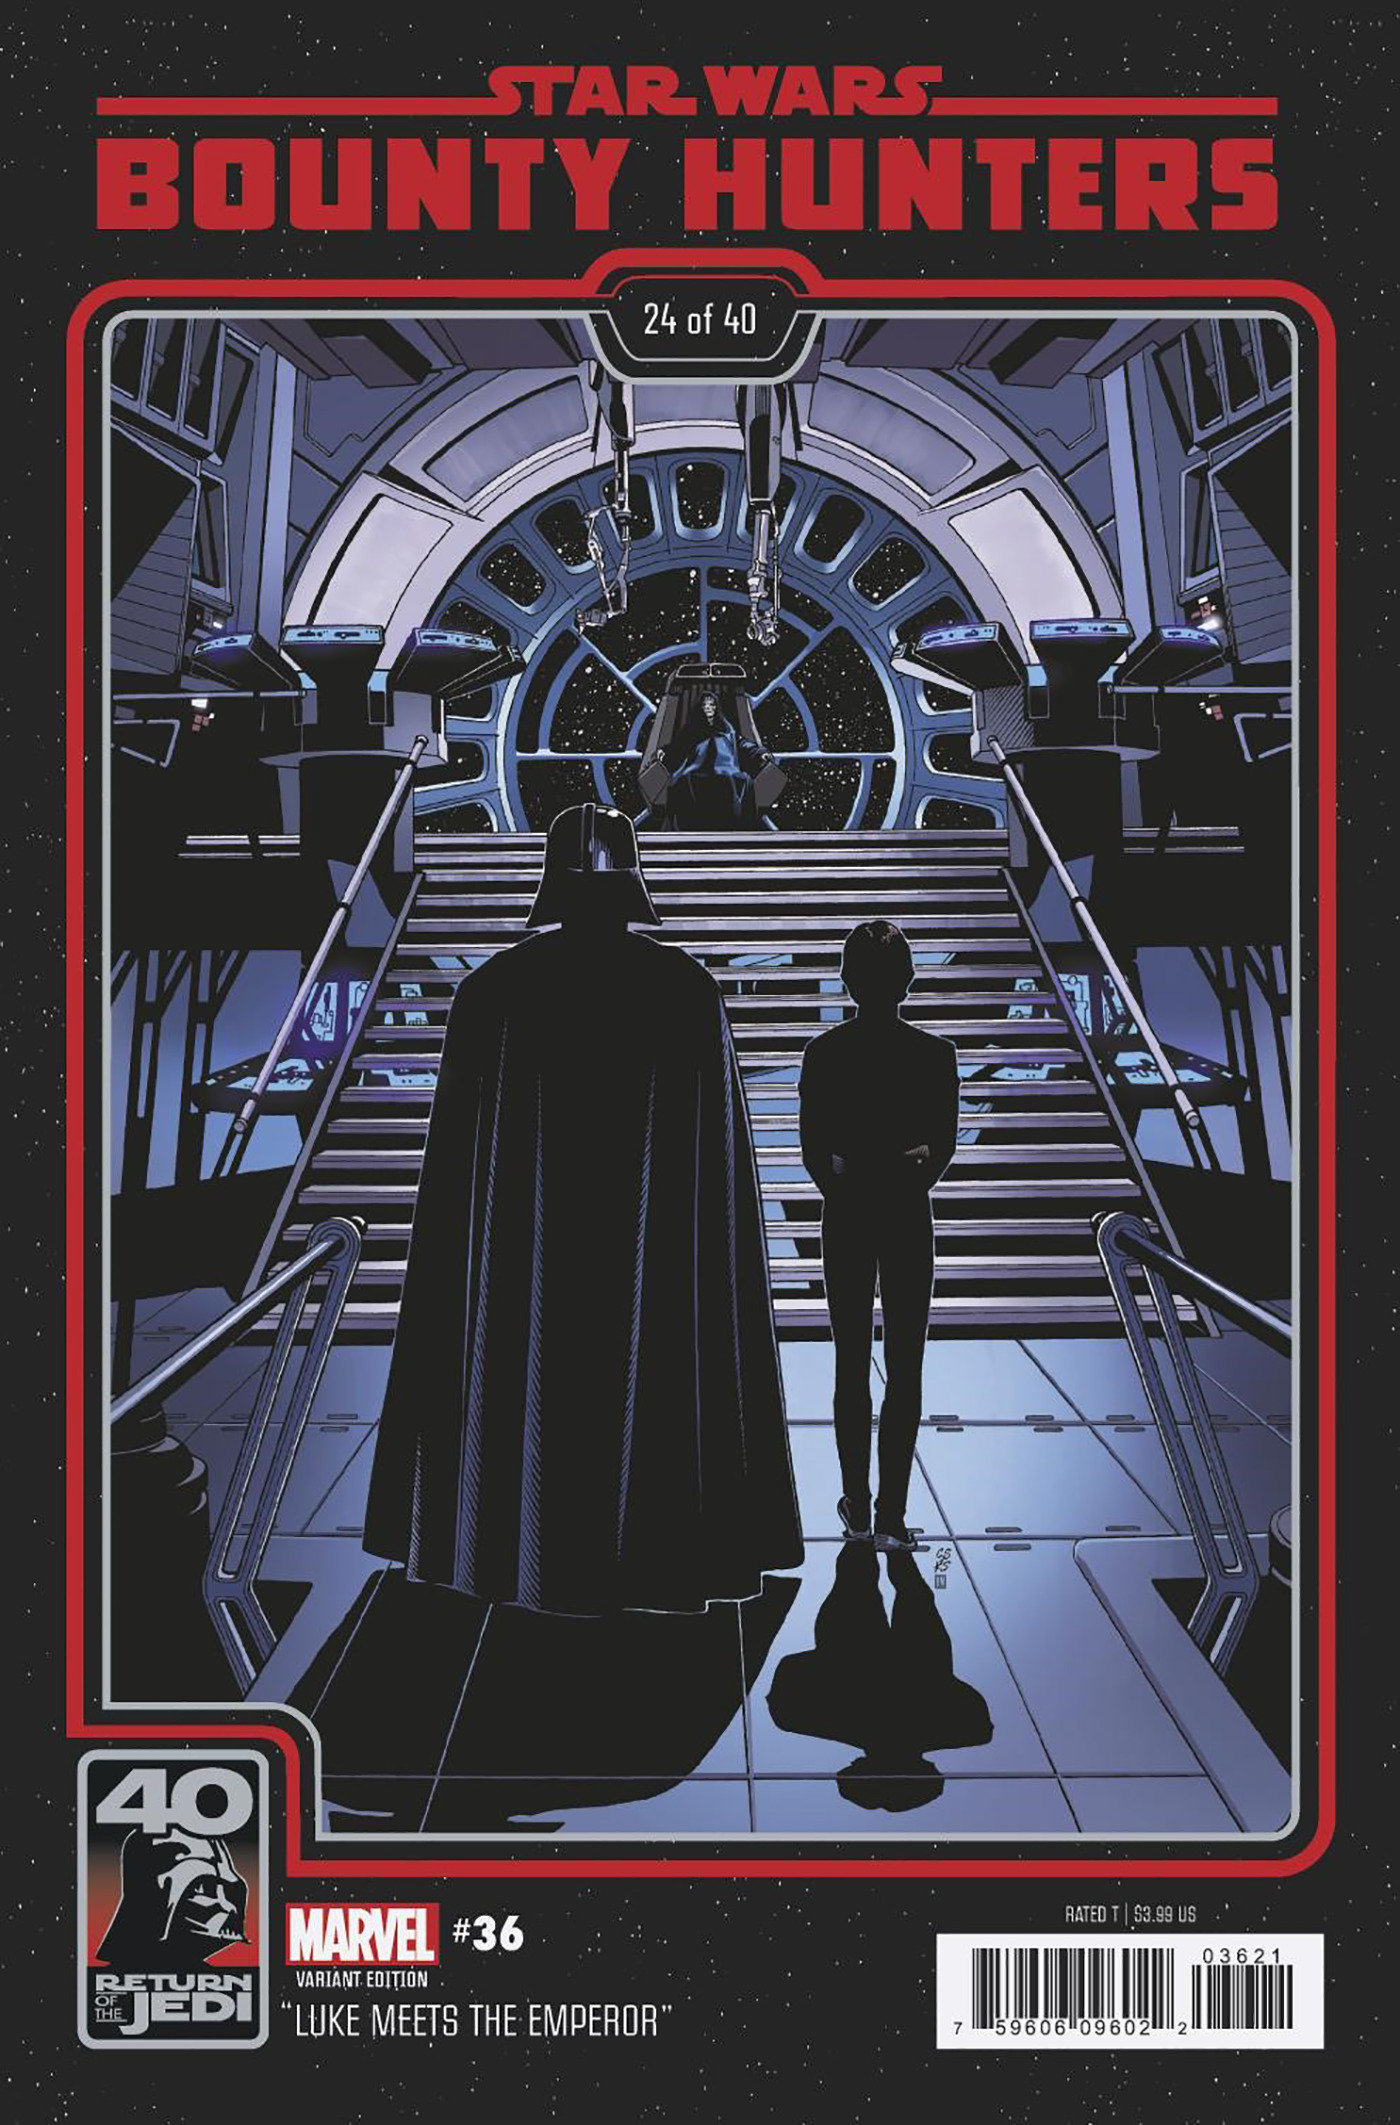 Star Wars: Bounty Hunters #36 Chris Sprouse Return of the Jedi 40th Anniversary Variant